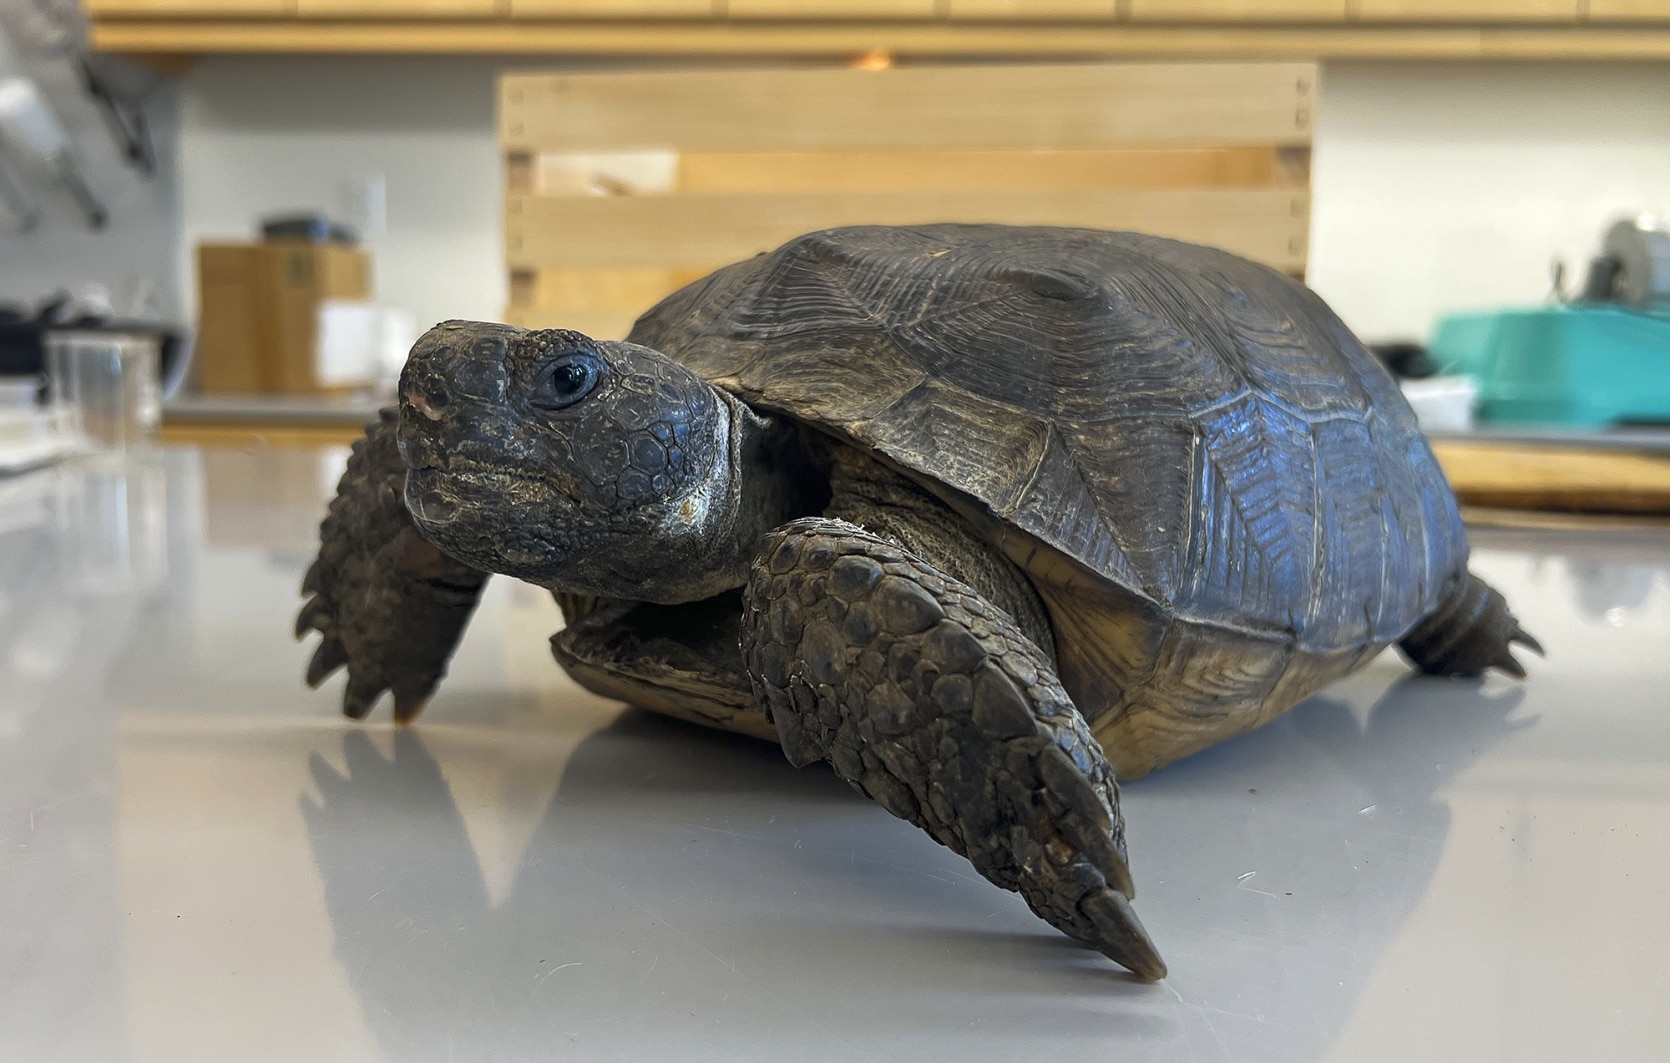 Turtles are vulnerable to illegal wildlife trade 